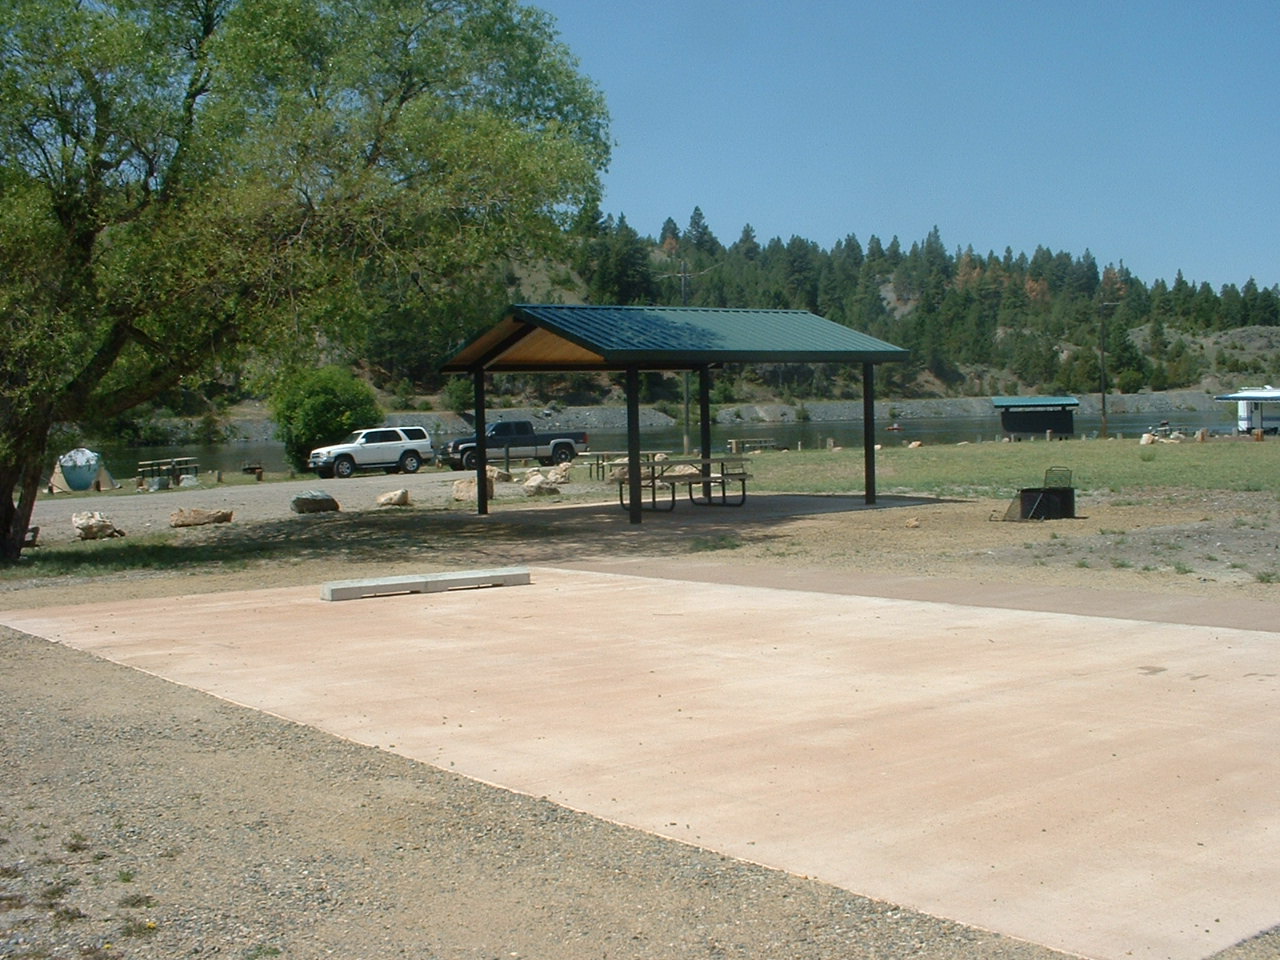 picture showing Marked accessible camping unit at Riverside Campground with shelter over the picnic table.